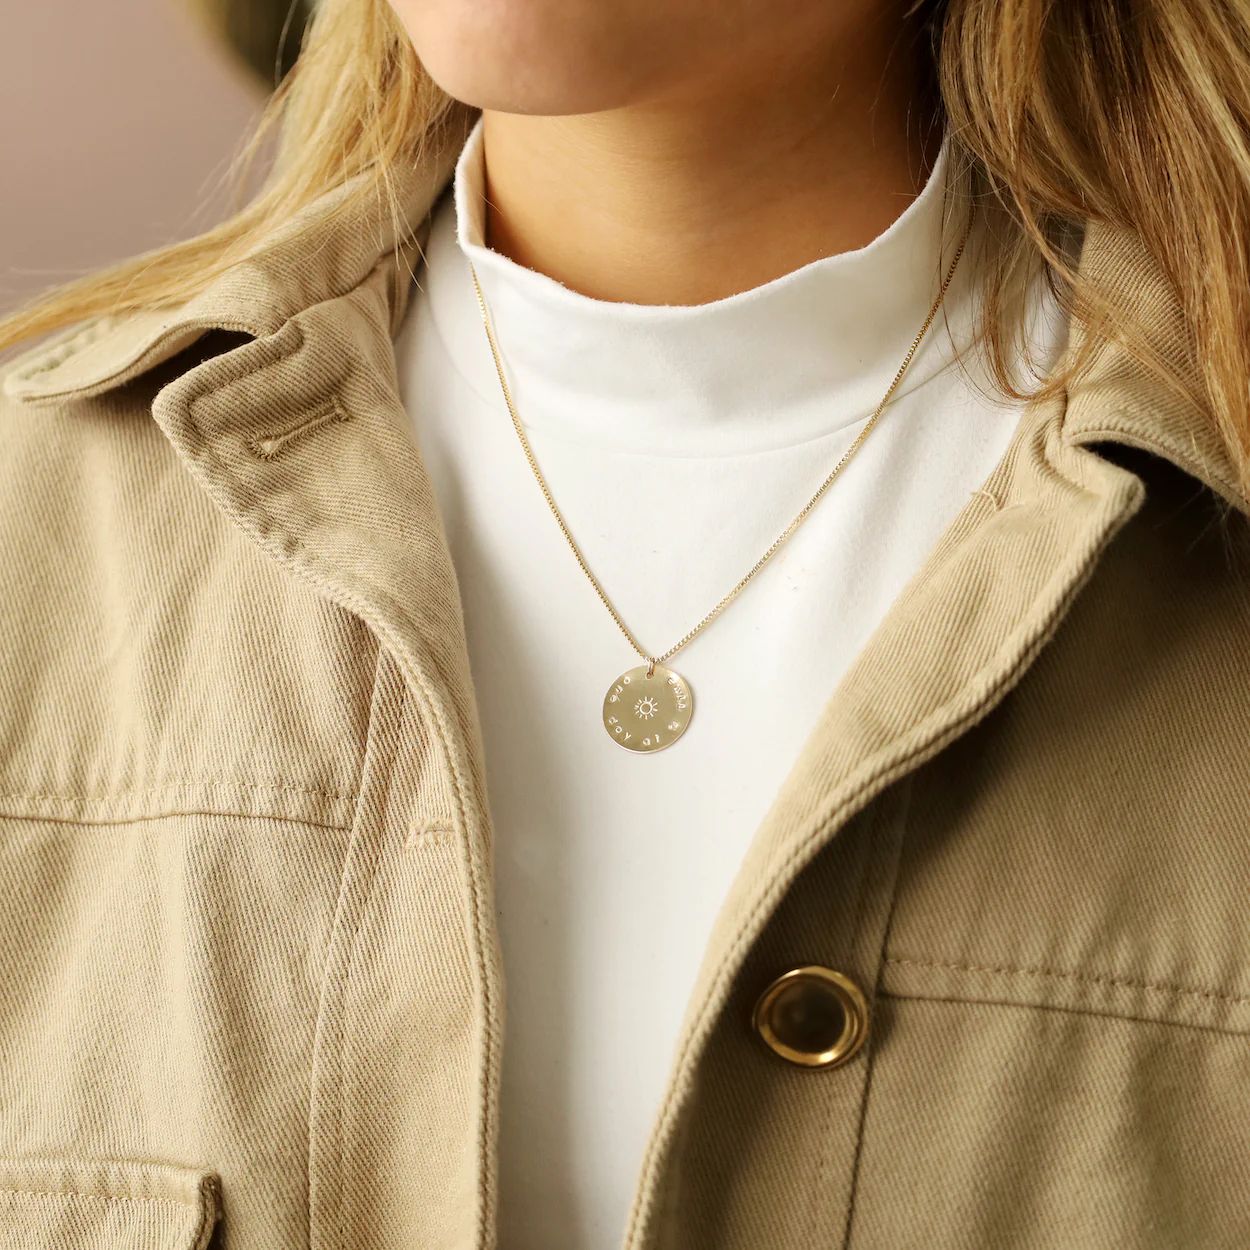 One Day at a Time Necklace | Taudrey